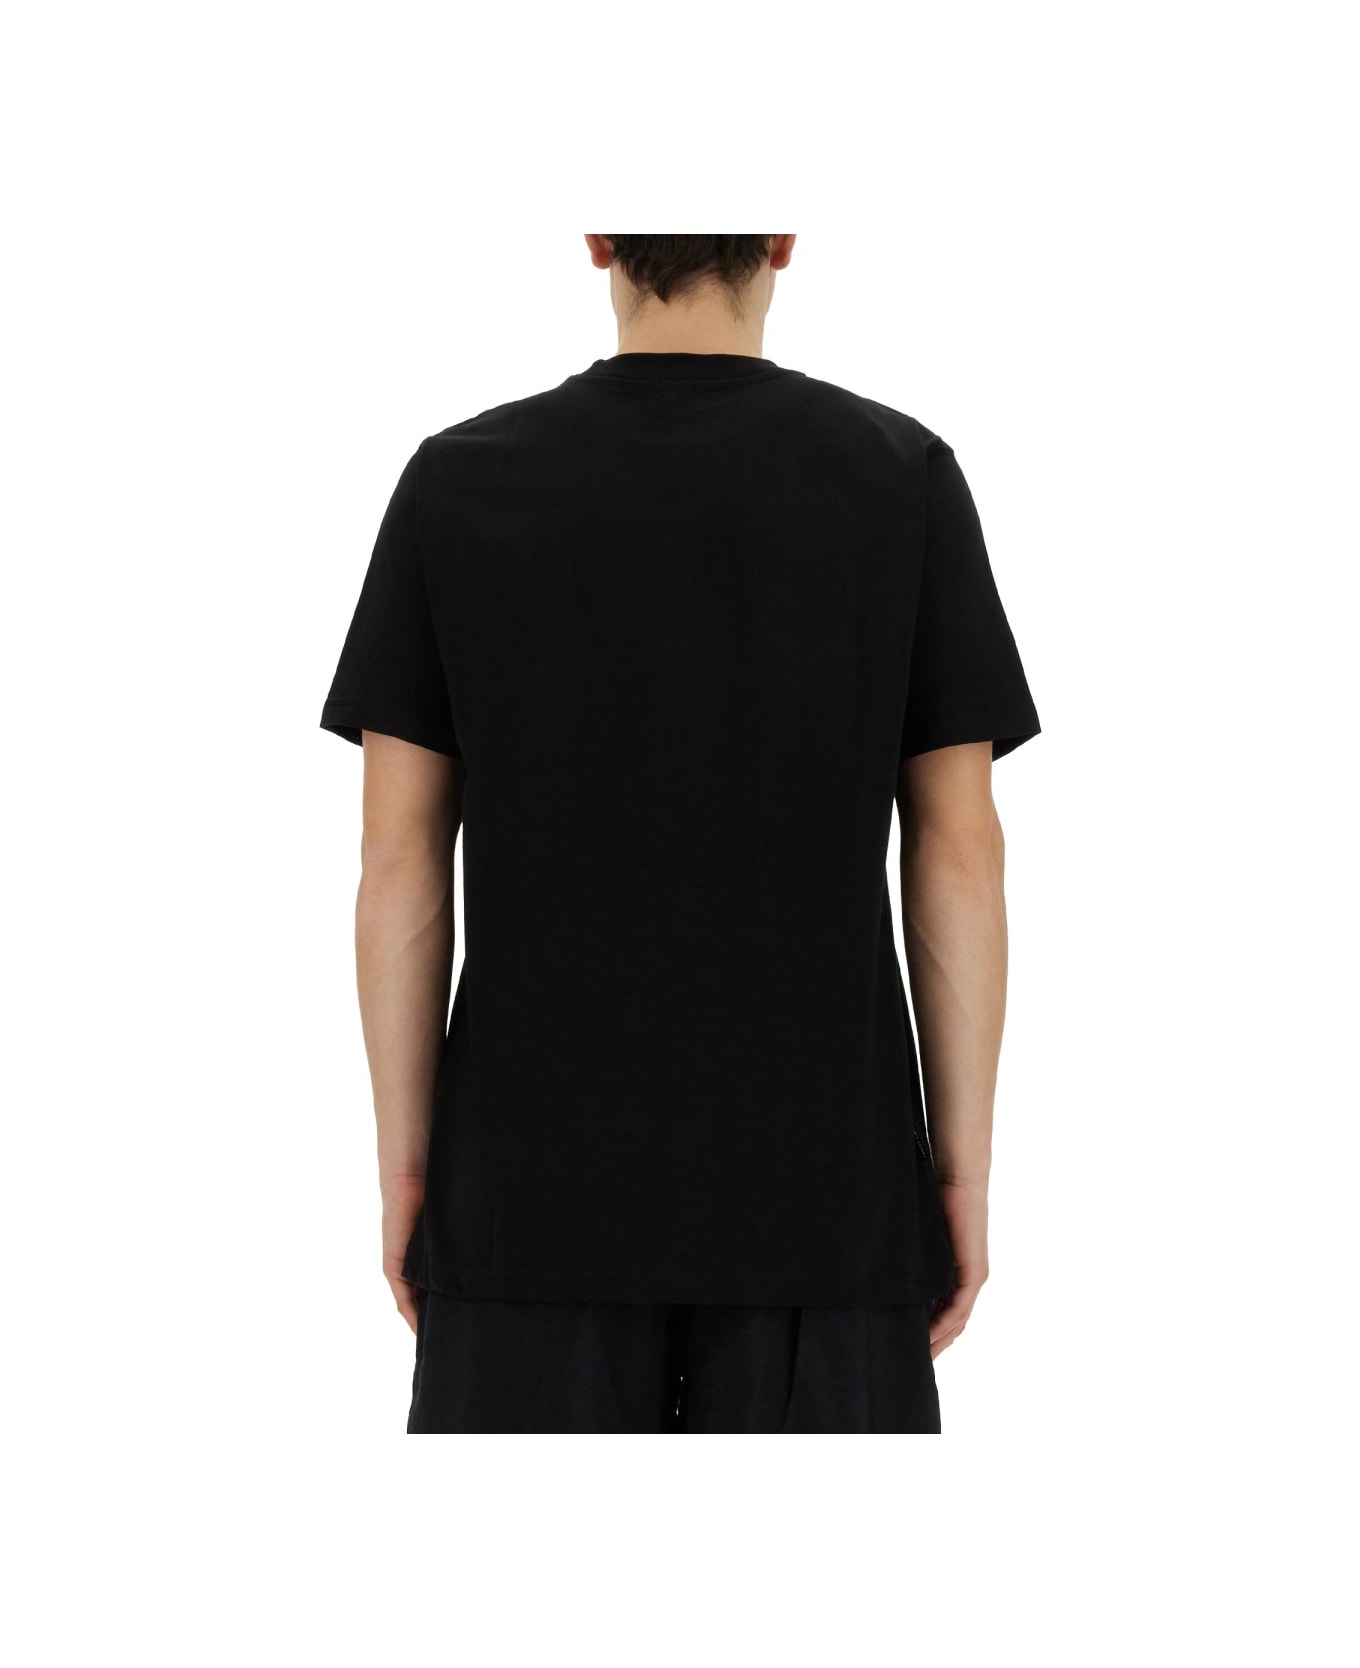 Family First Milano T-shirt With Heart Embroidery - BLACK シャツ